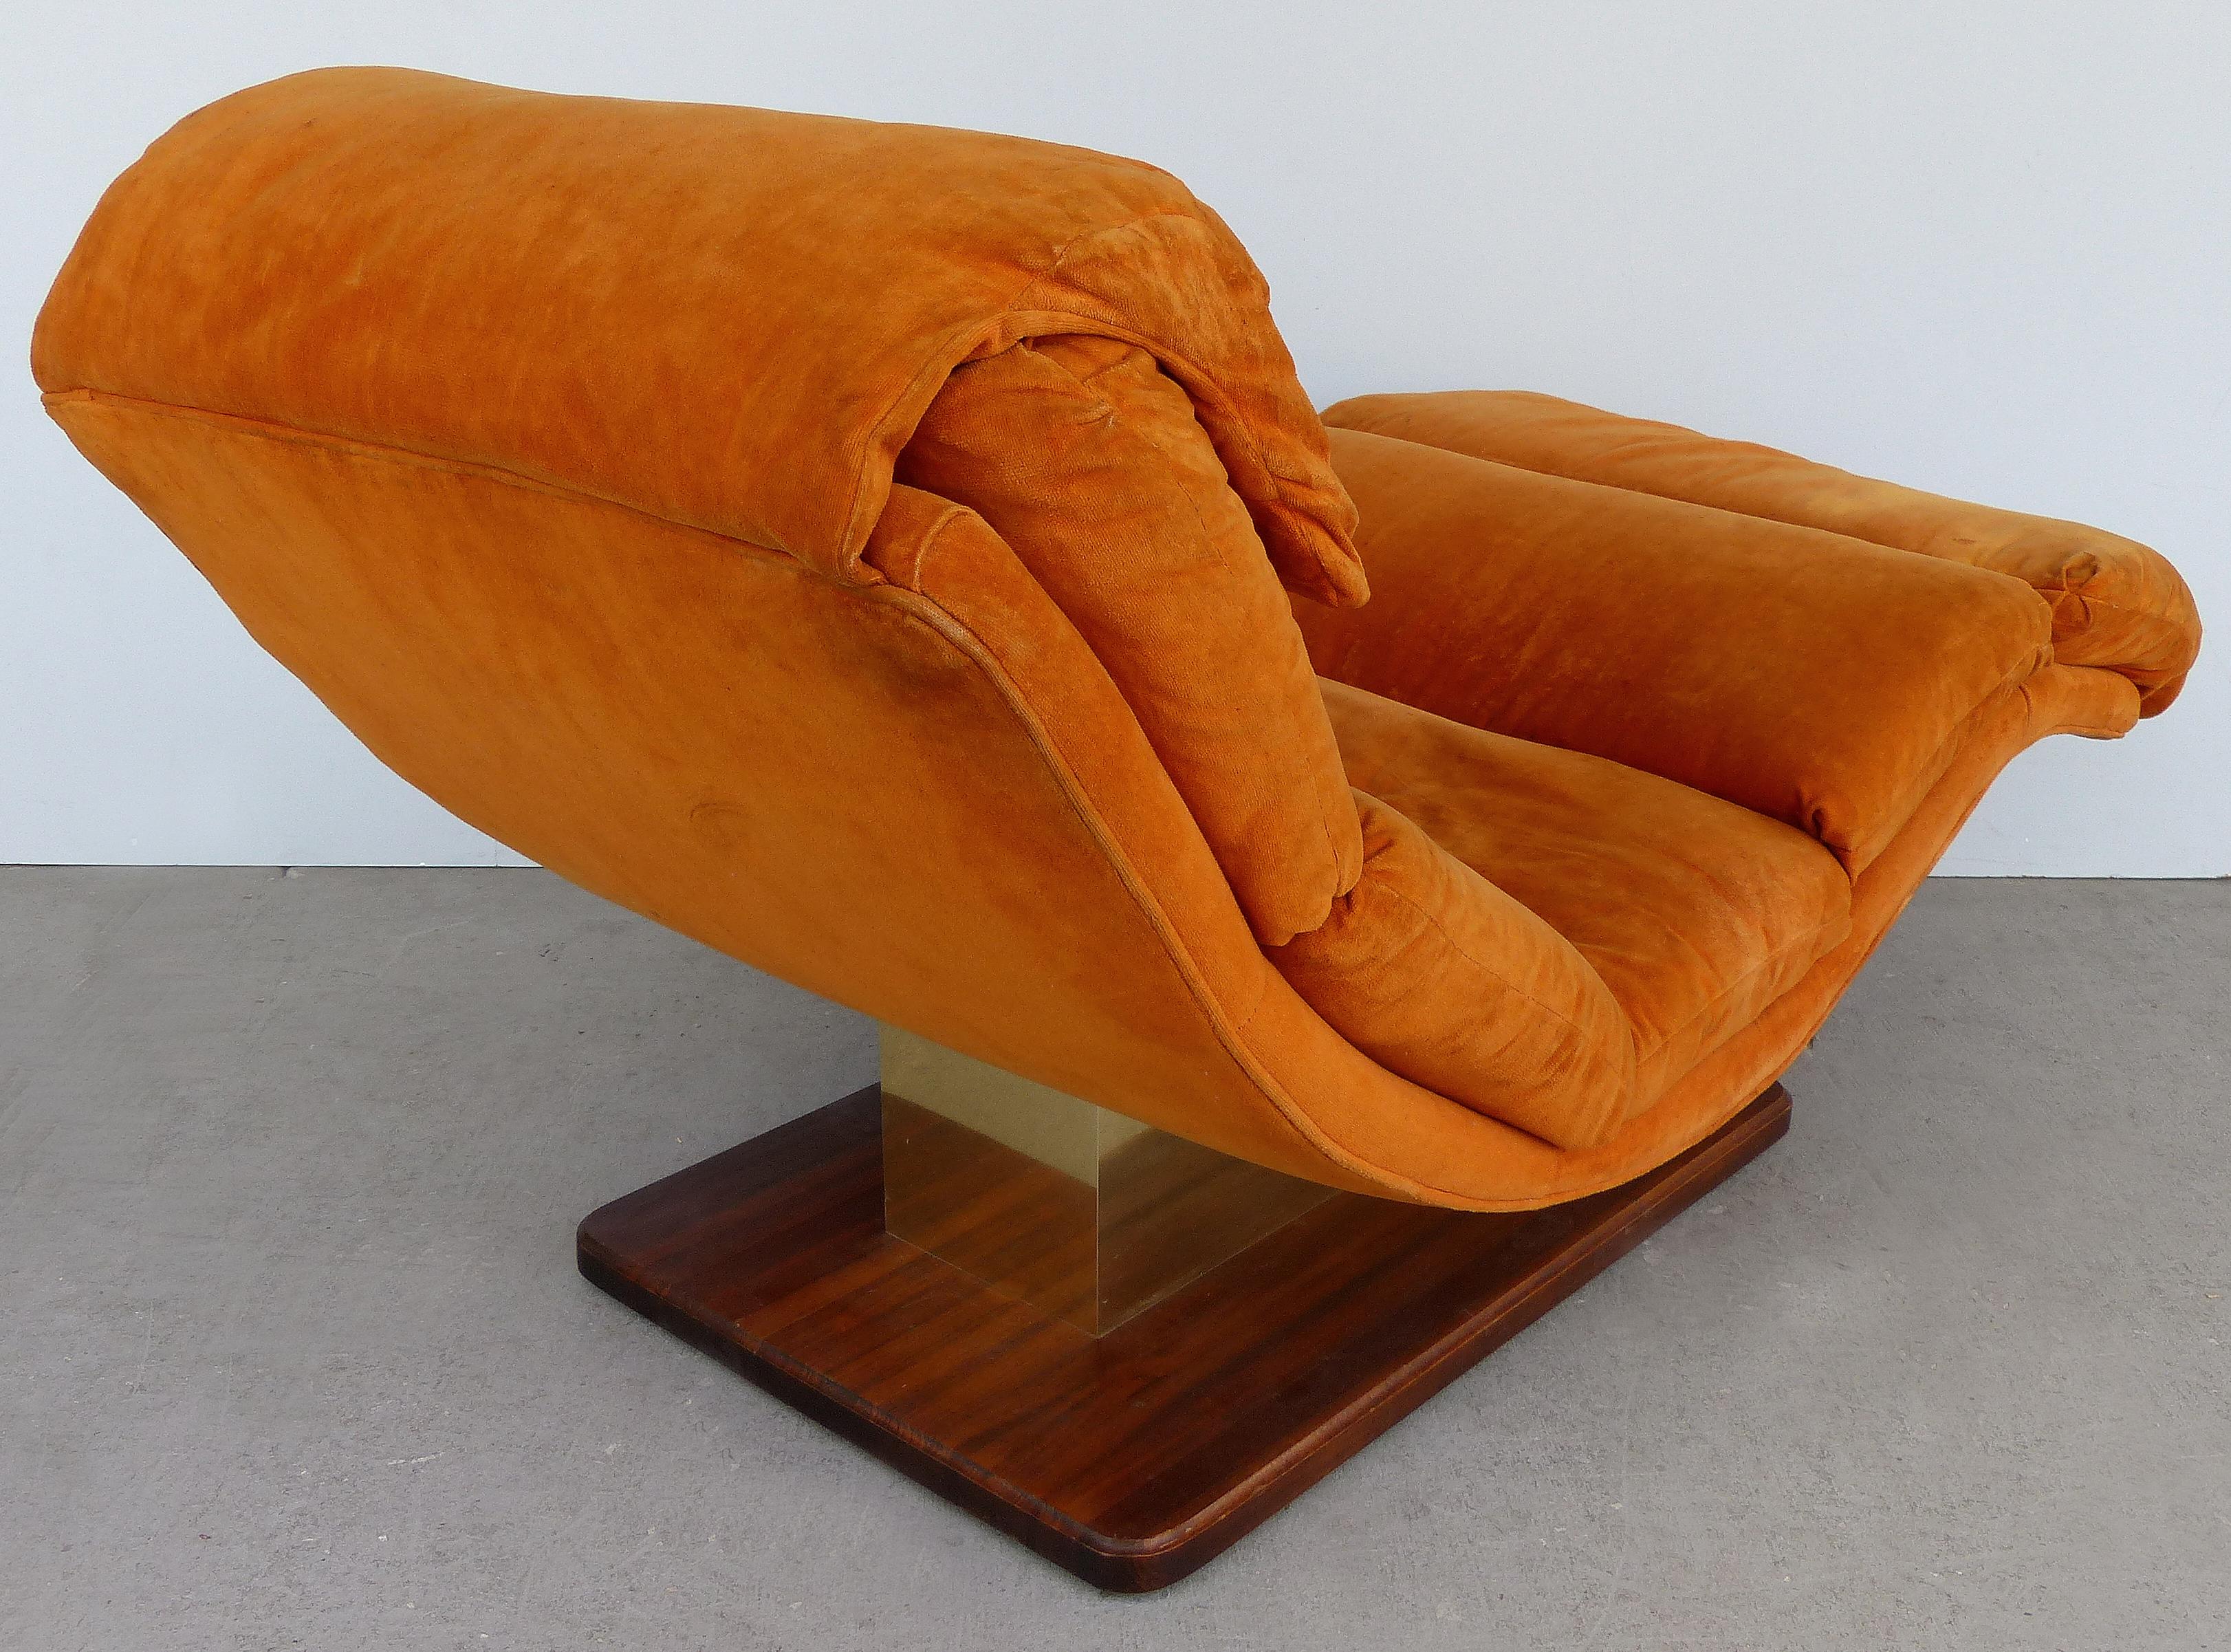 American Mid-Century Modern Chaise Longue by Carson's with a Wood and Brass Base